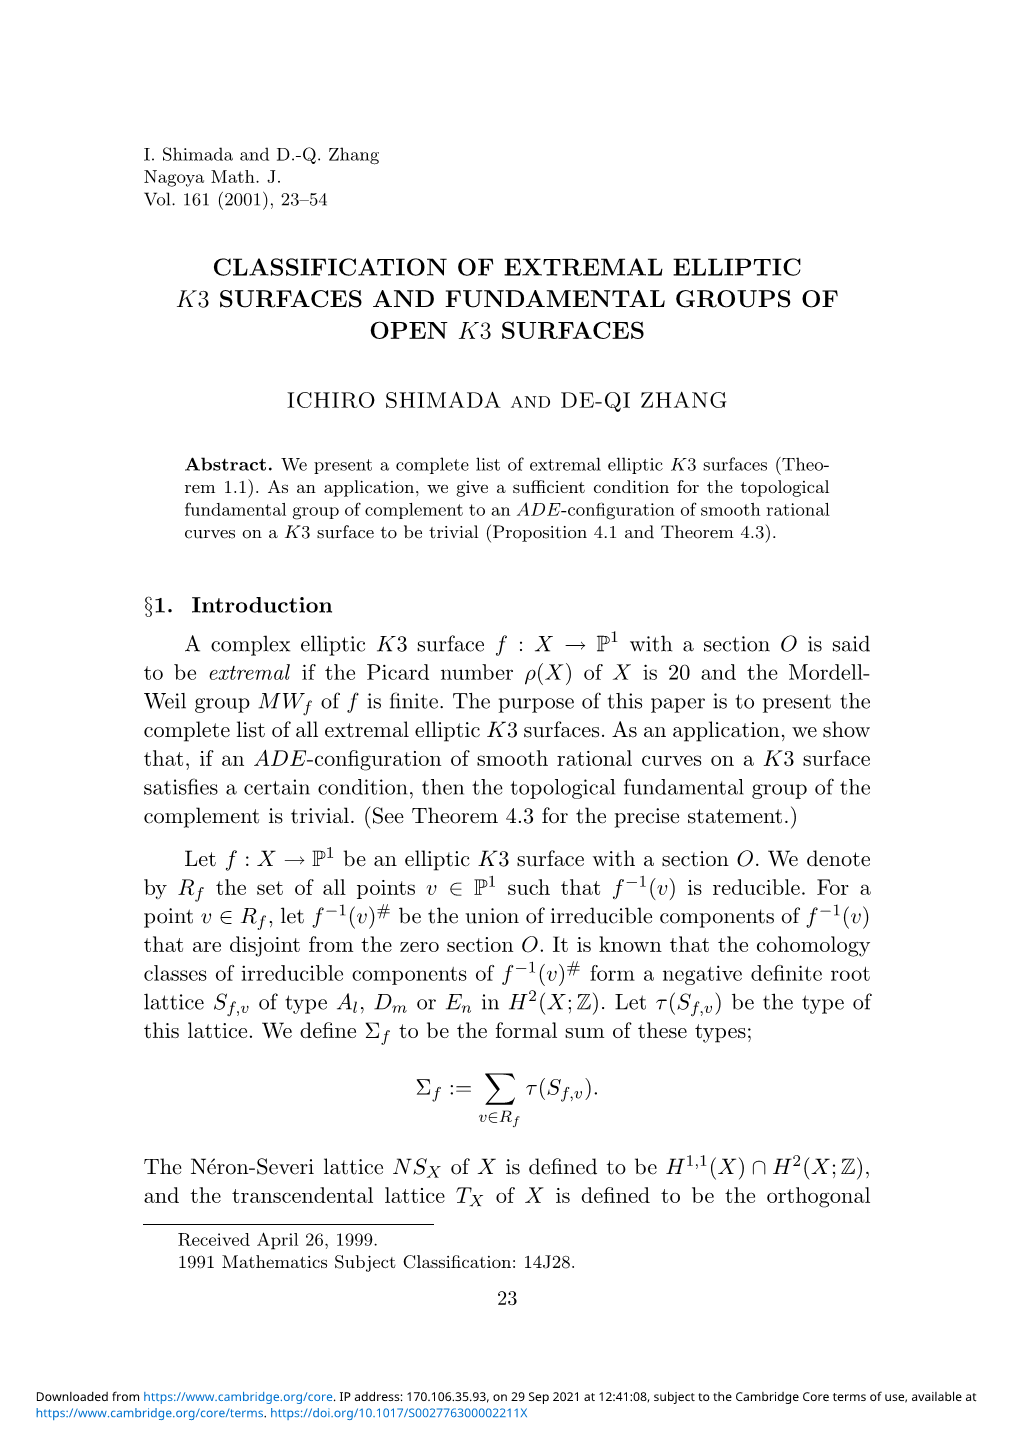 Classification of Extremal Elliptic K3 Surfaces and Fundamental Groups of Open K3 Surfaces